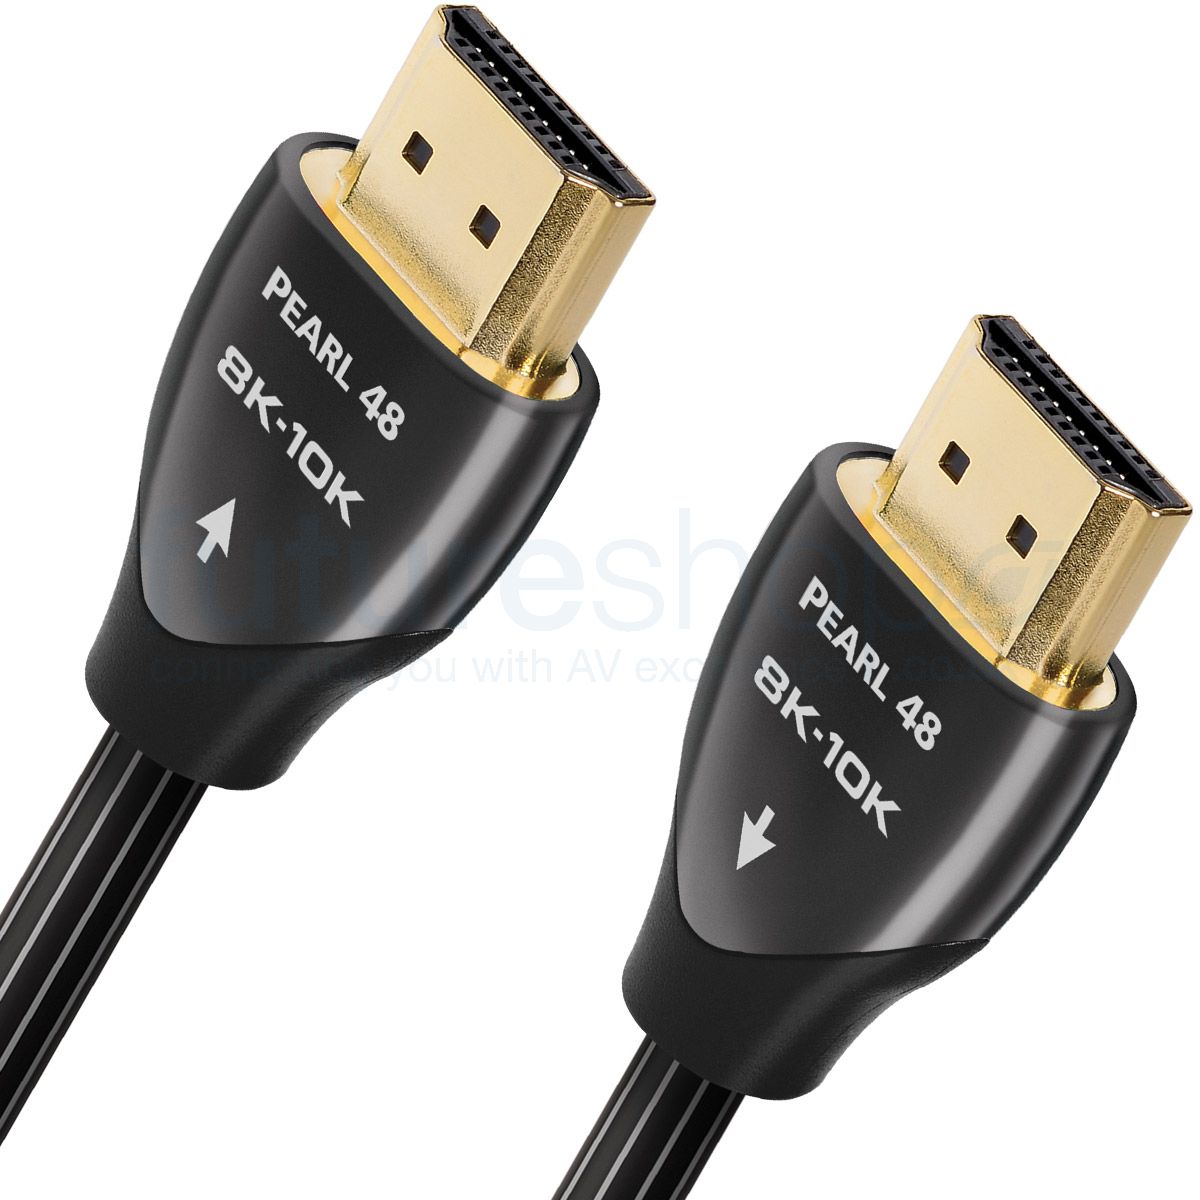 AudioQuest 48G HDMI Cable